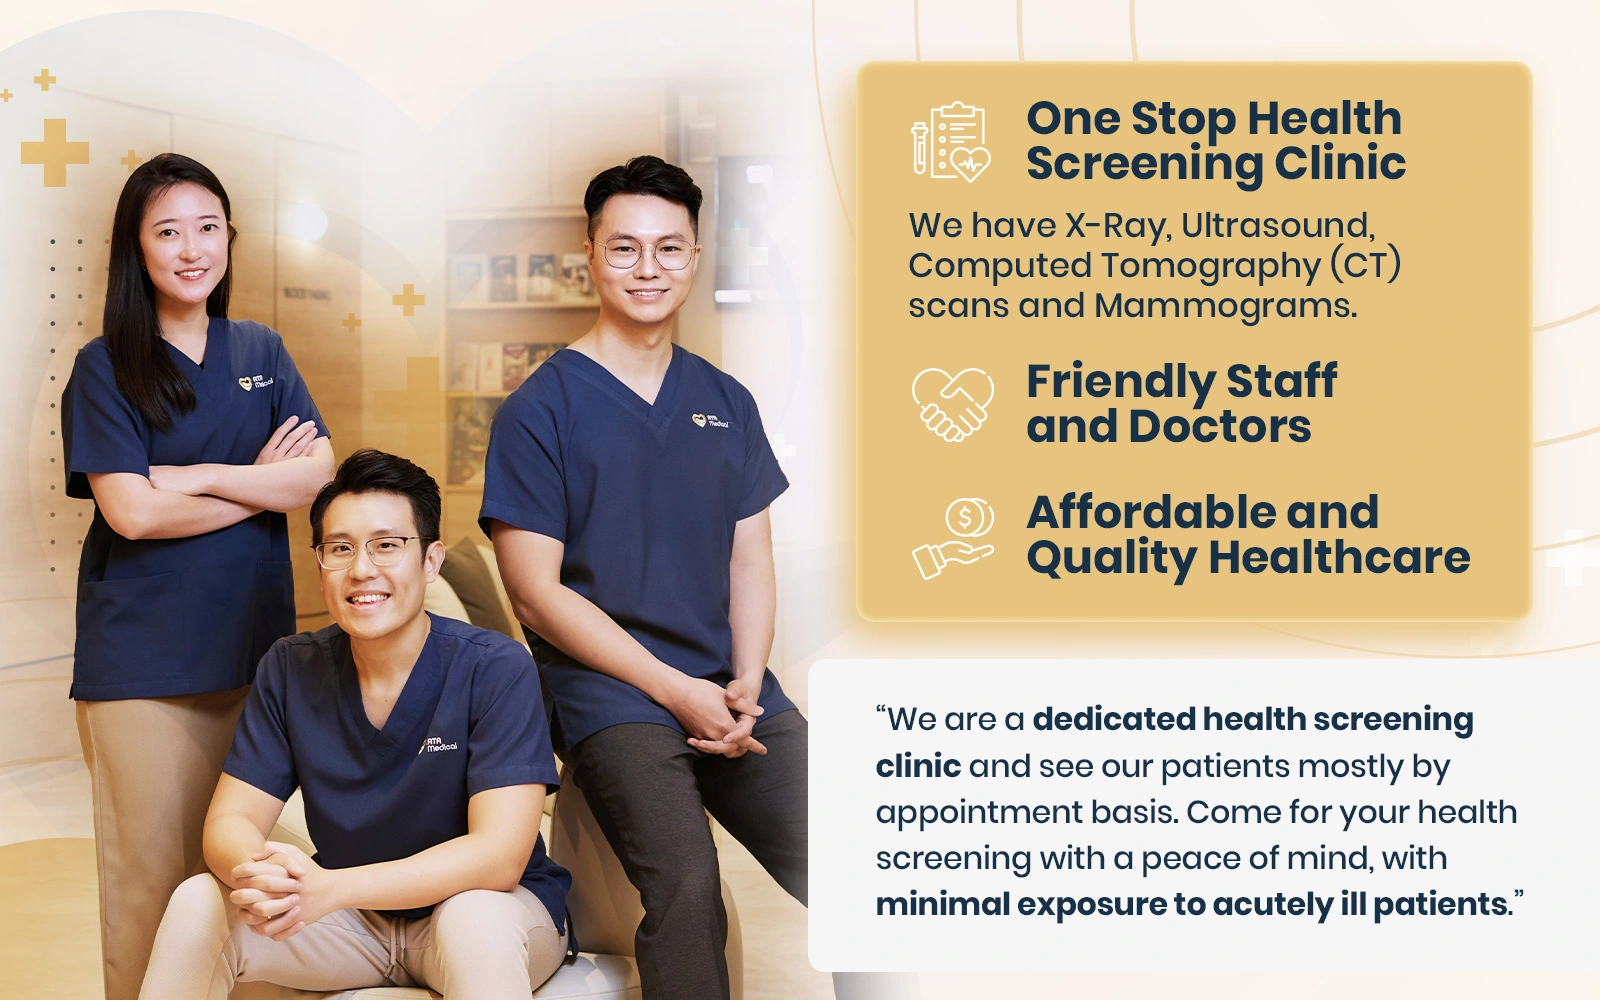 ATA Medical - One Stop Health Screening Clinic with X Ray, CT Scan, Mammogram and Ultrasound scans.